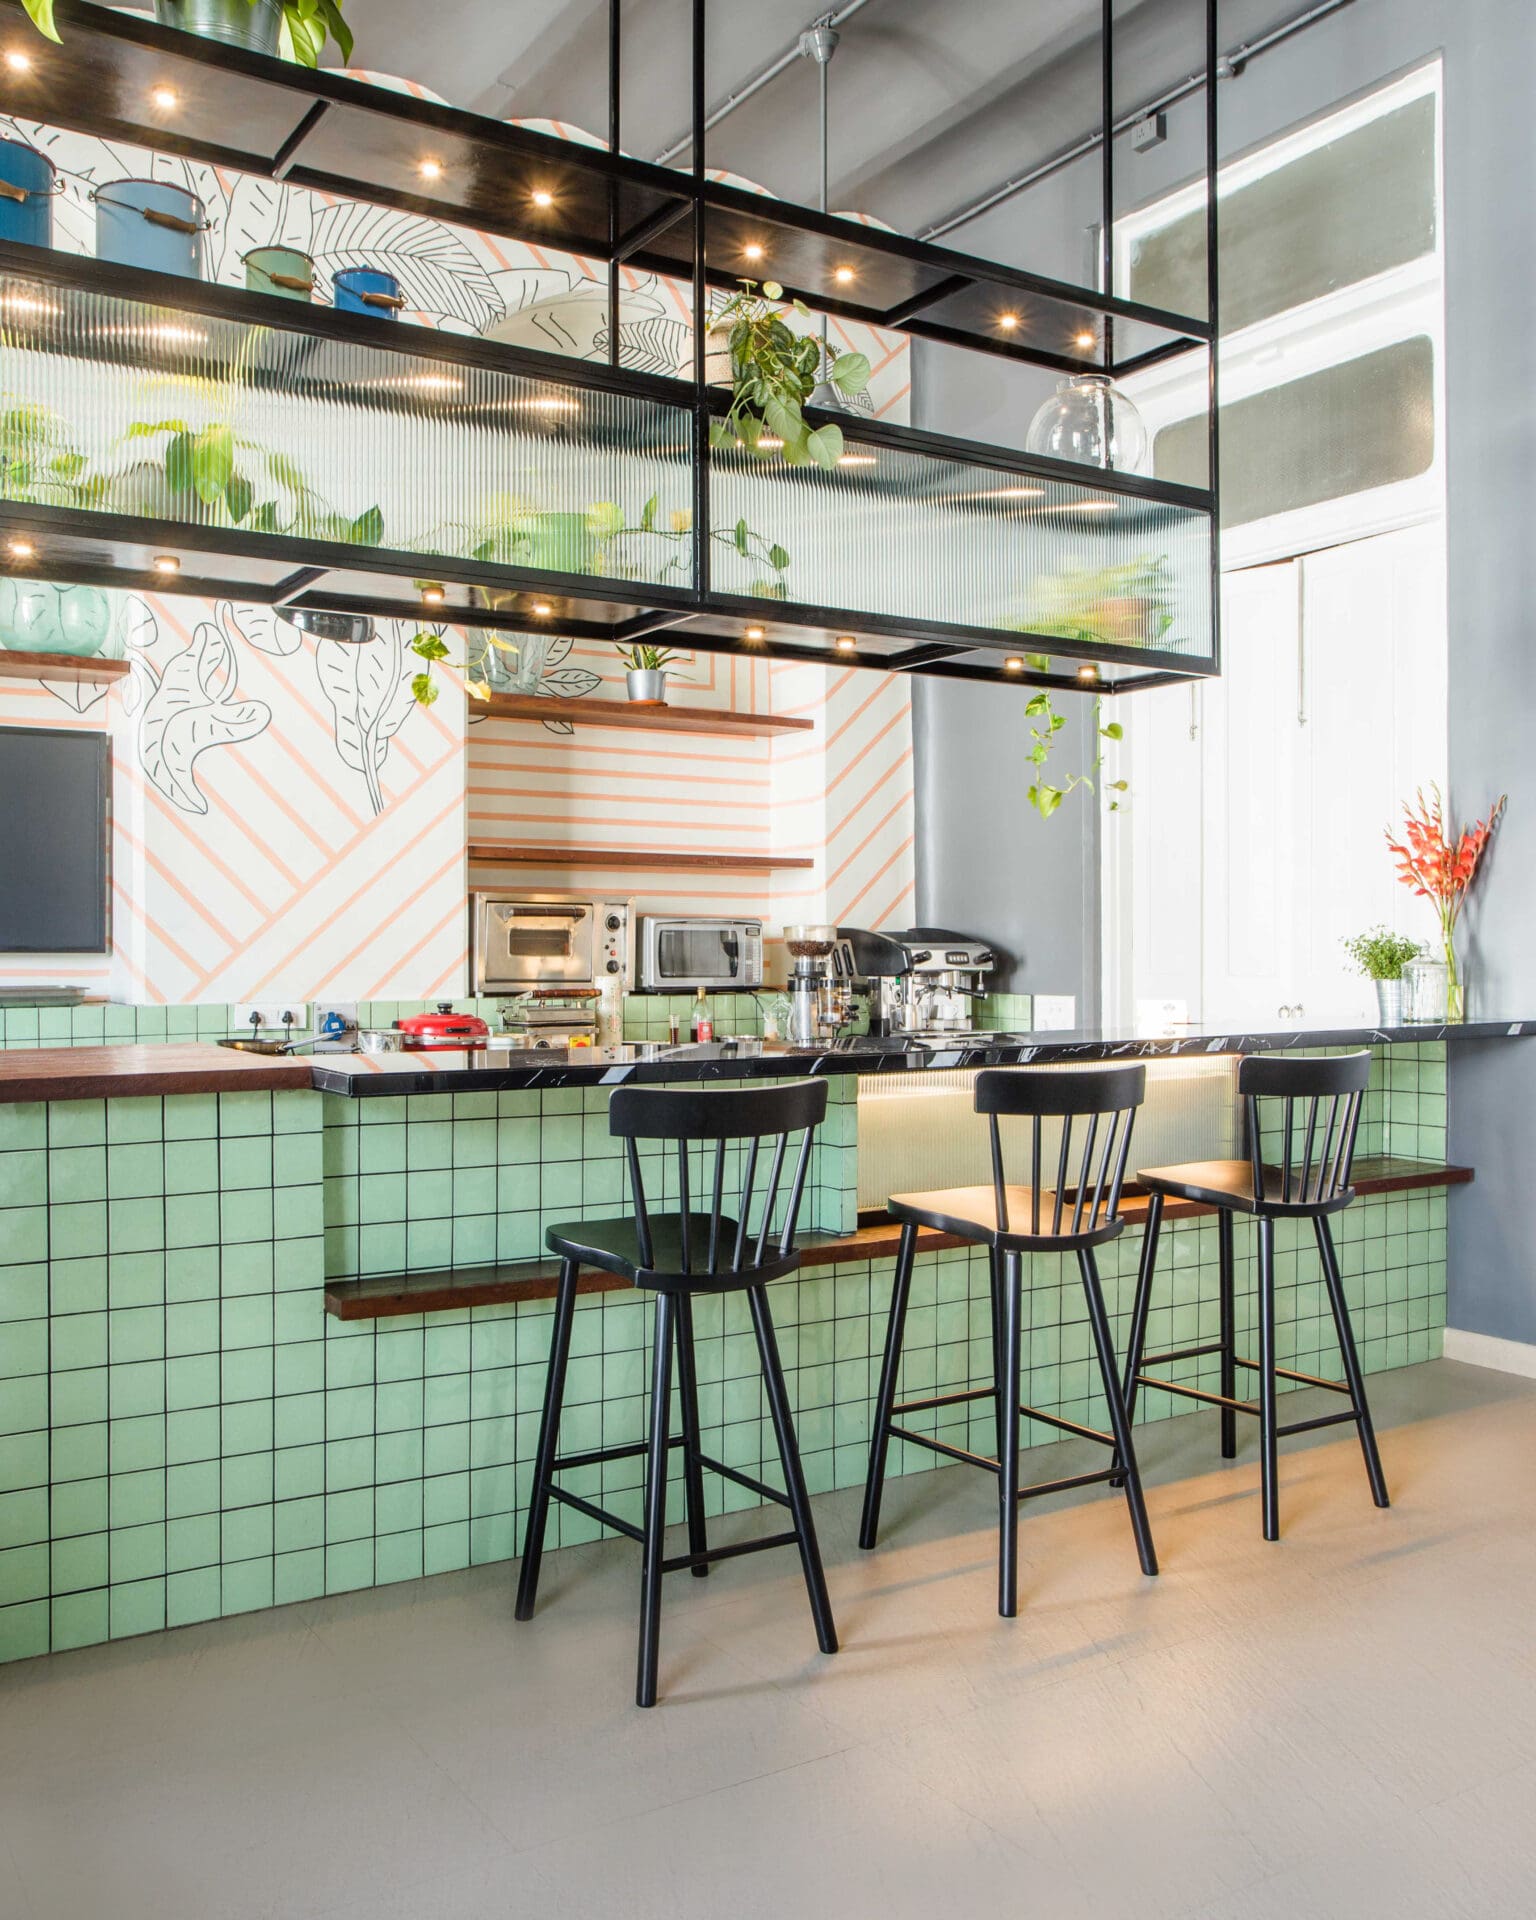 Best co-working spaces Mumbai | the counter area at The Ministry of New Café Savor, with mint green tiles and dark-wood stools in front of a white-tiled back bar